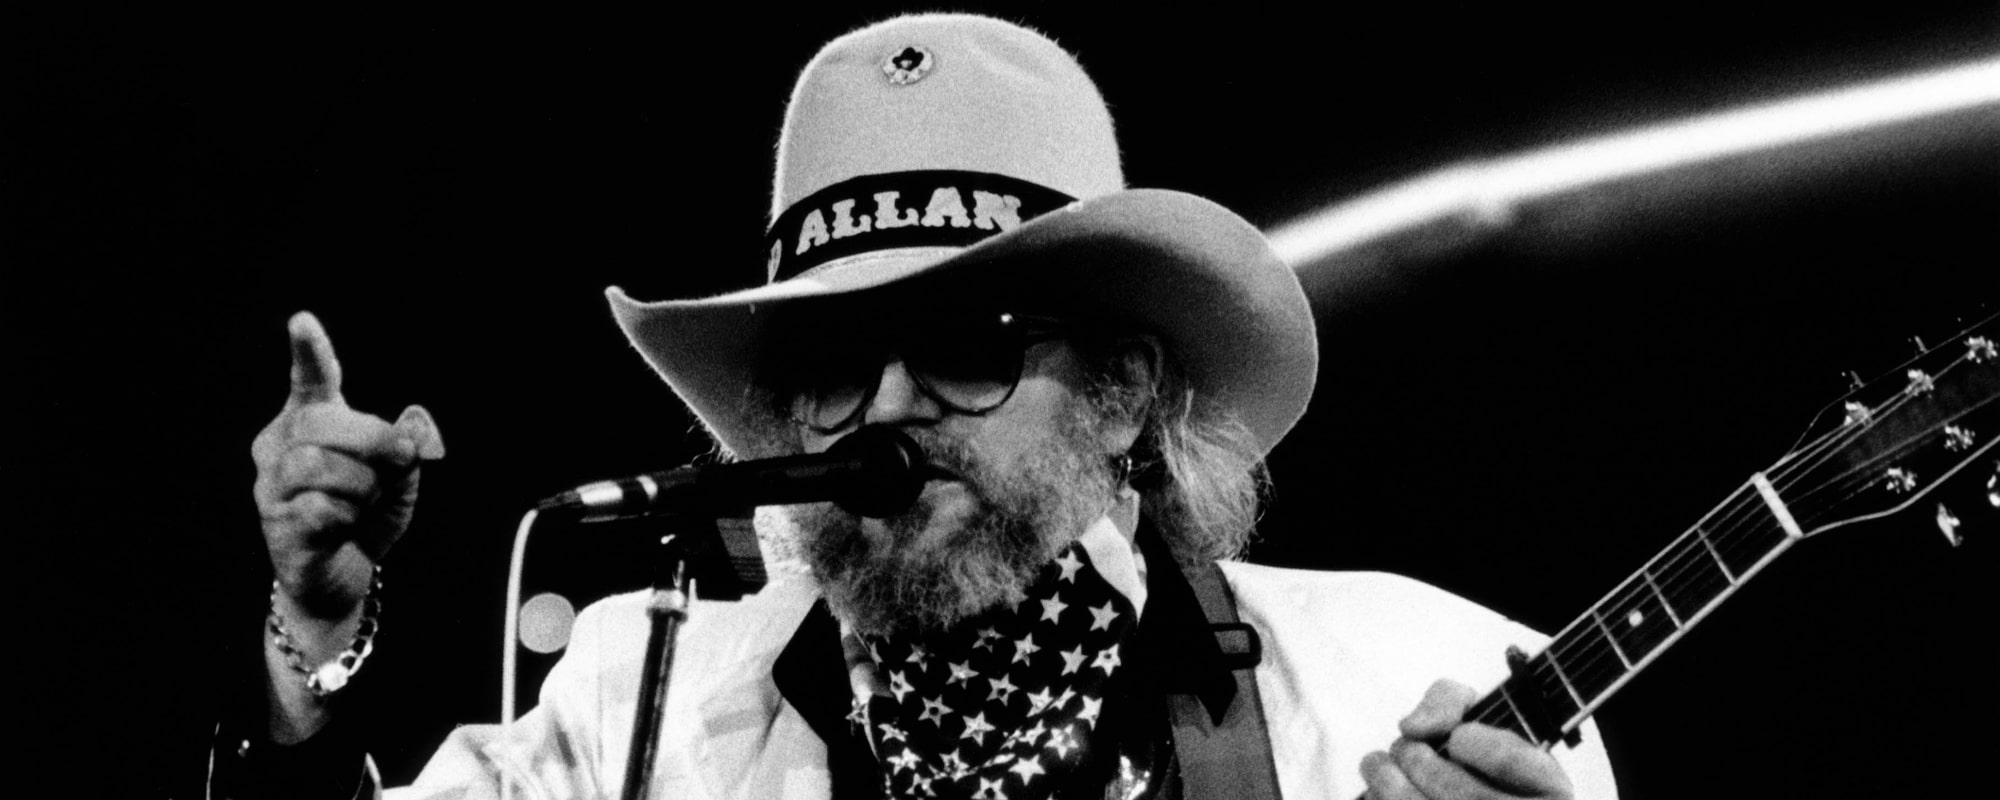 Chef’s Jam Session to David Allan Coe’s “You Never Even Called Me By My Name” Turns into a Restaurant Singalong